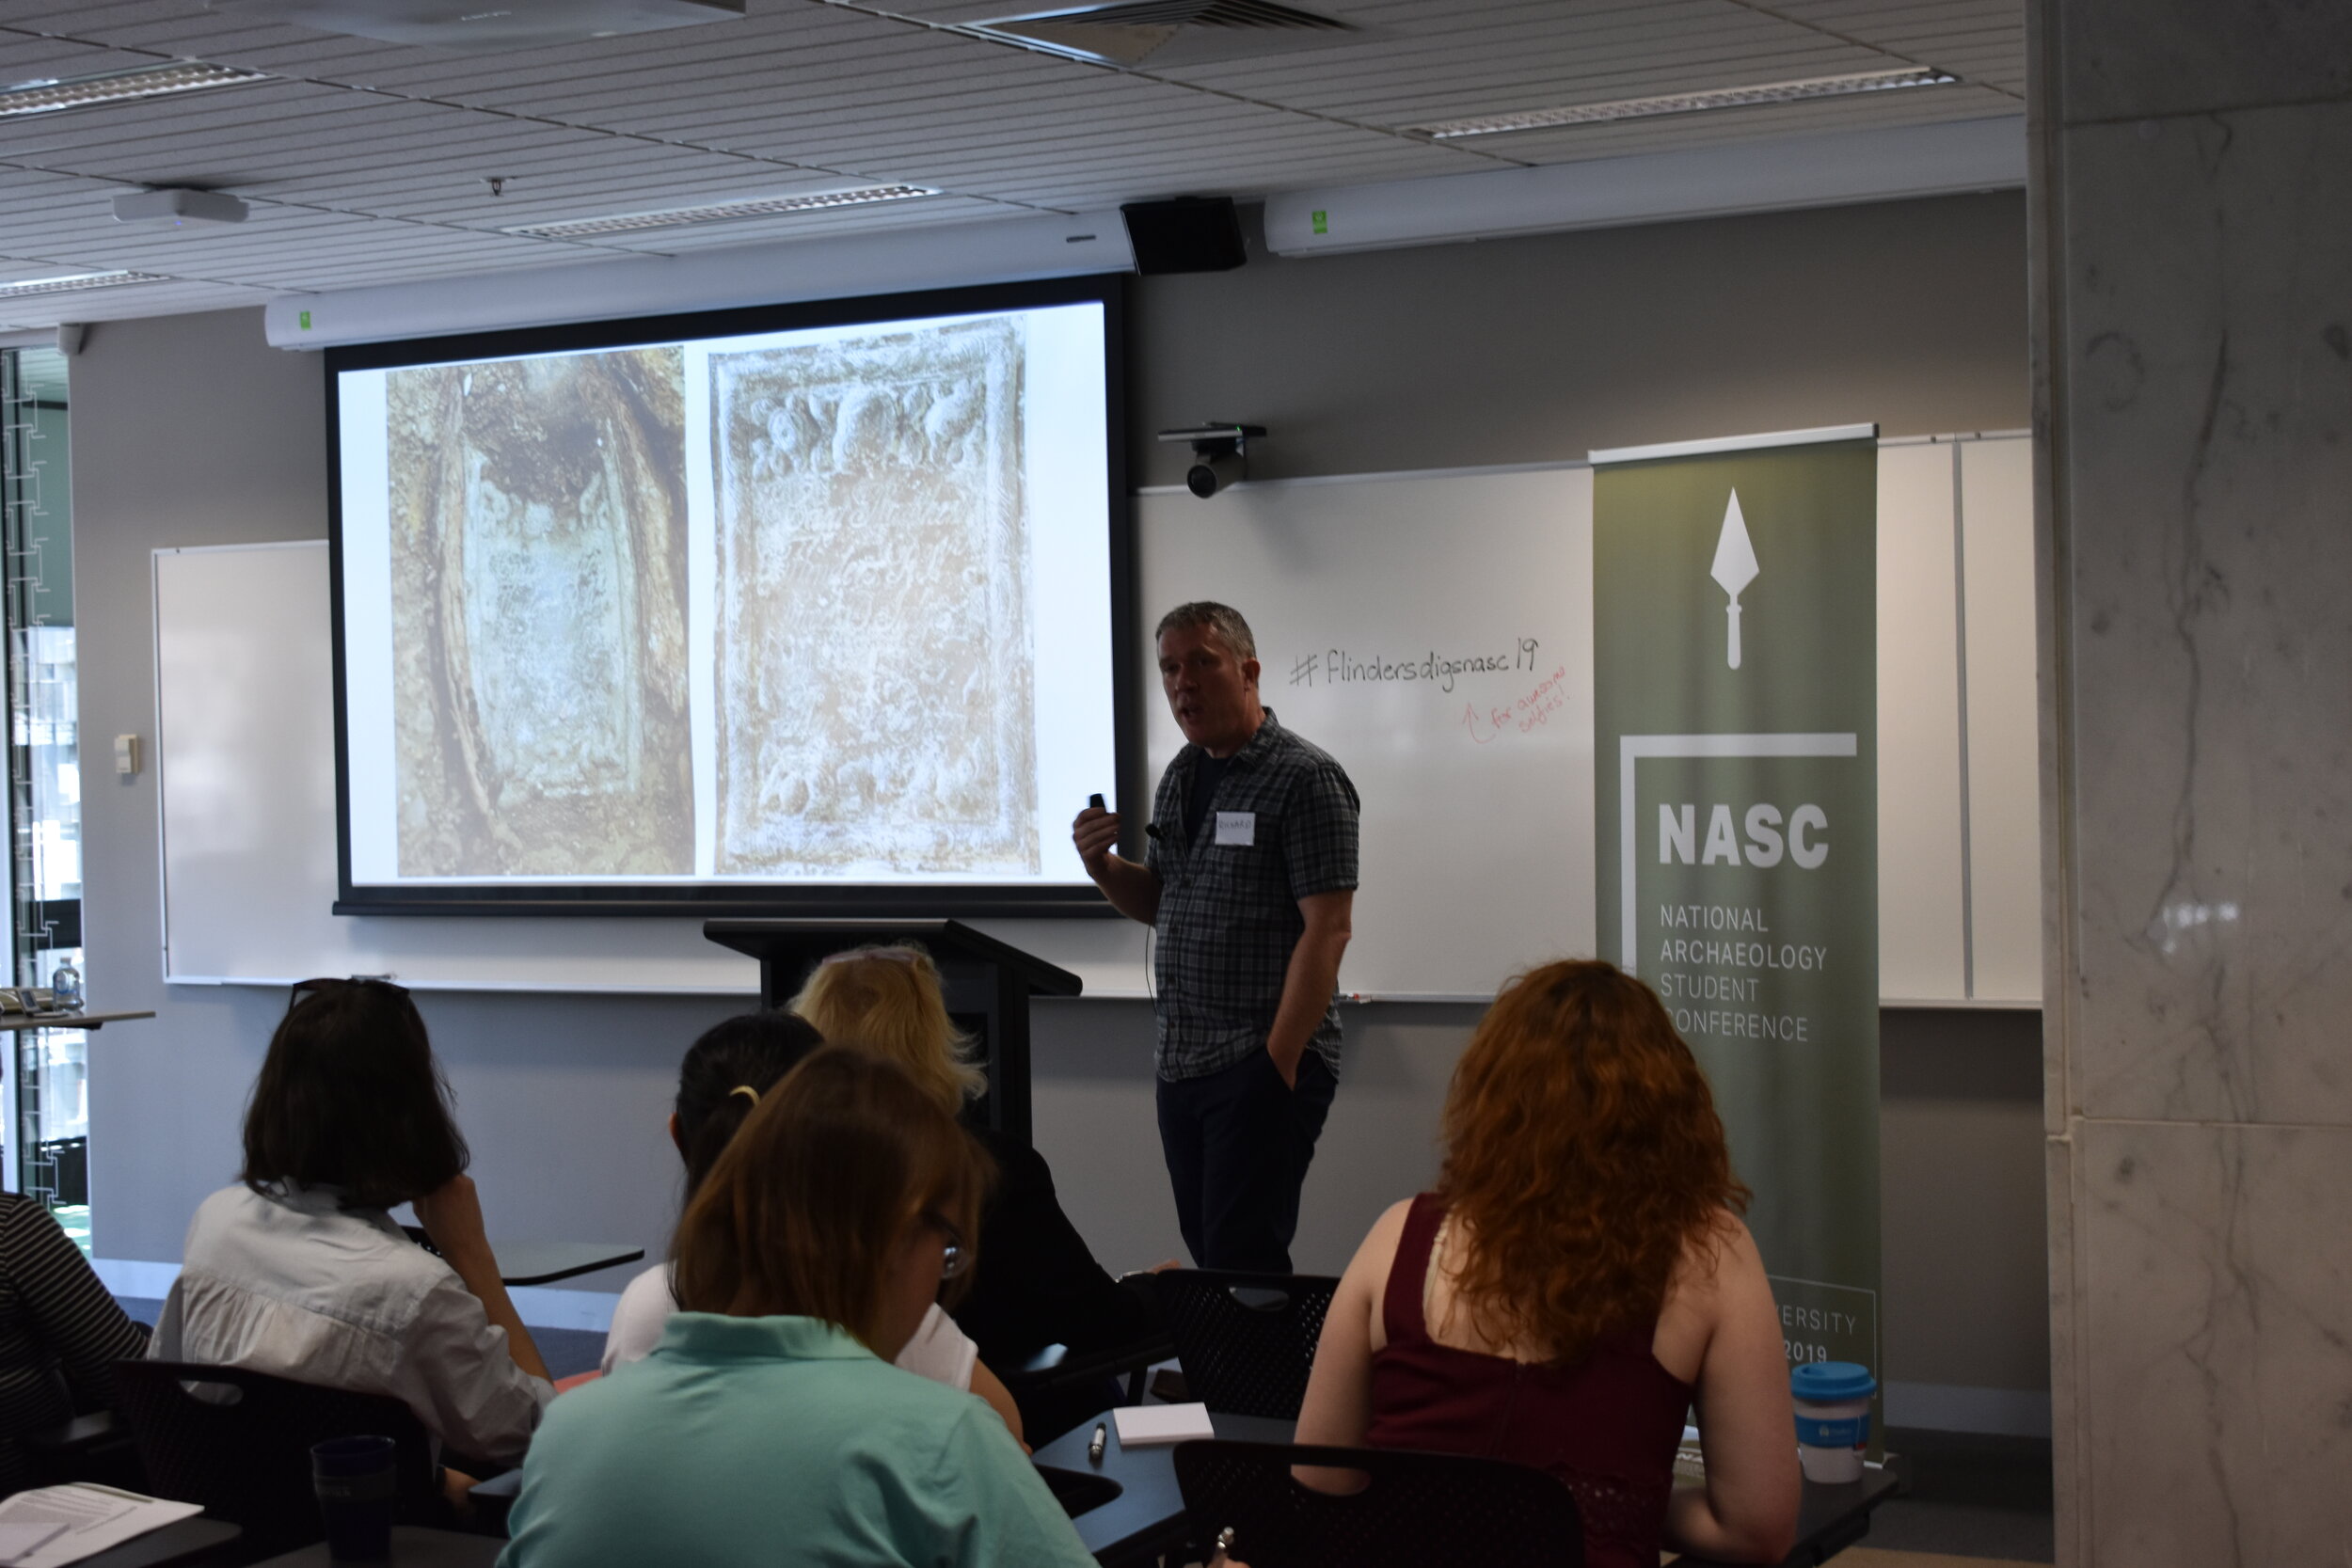 Richard Osgood Keynote 2019, "The catharsis of trauma: archaeology as wellbeing"